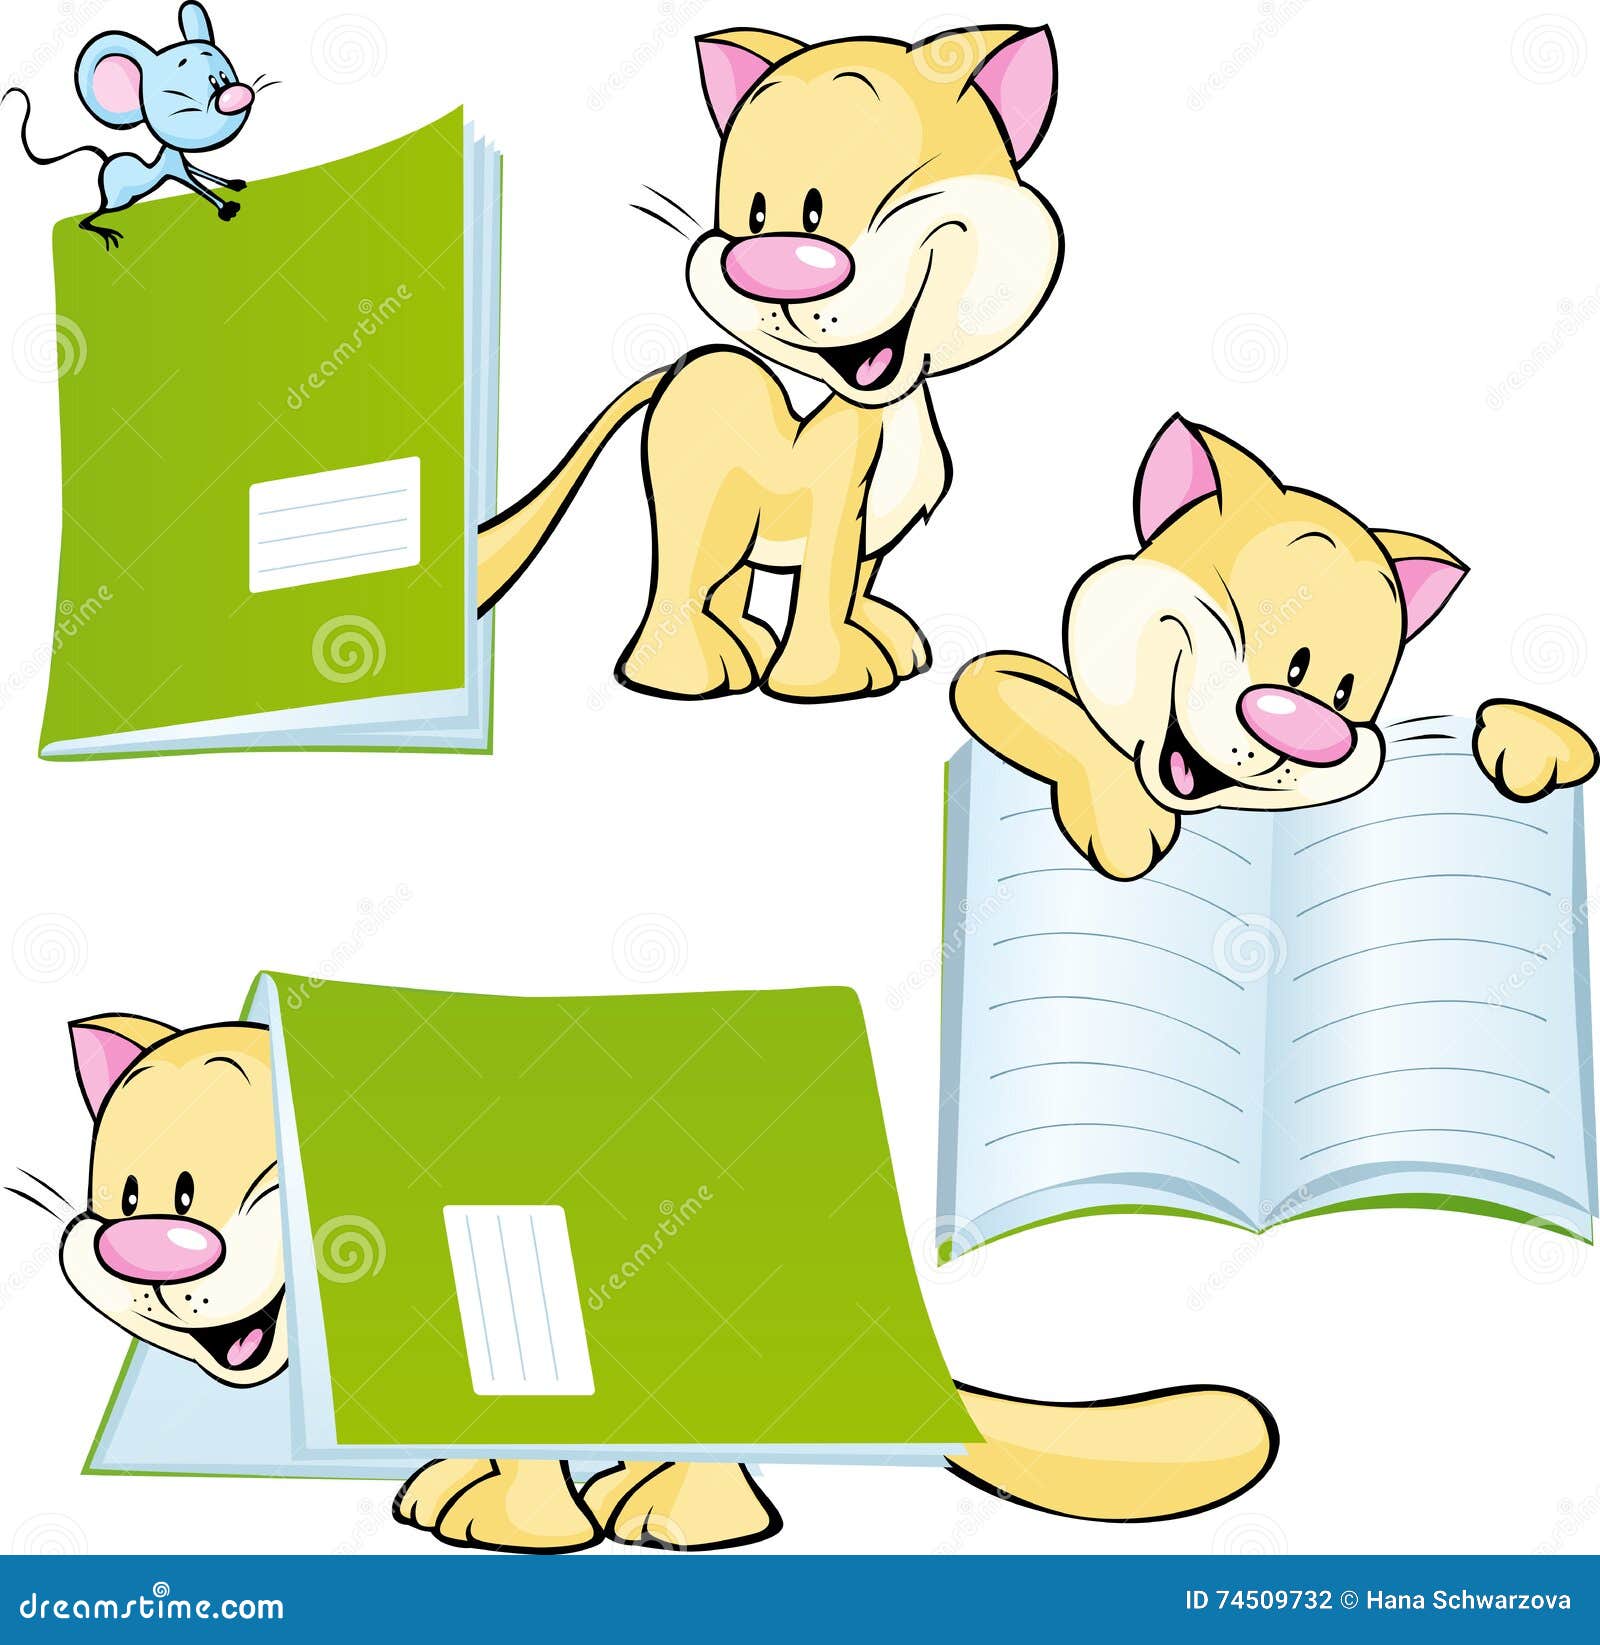 cheerful cat playing and learning with workbook - 